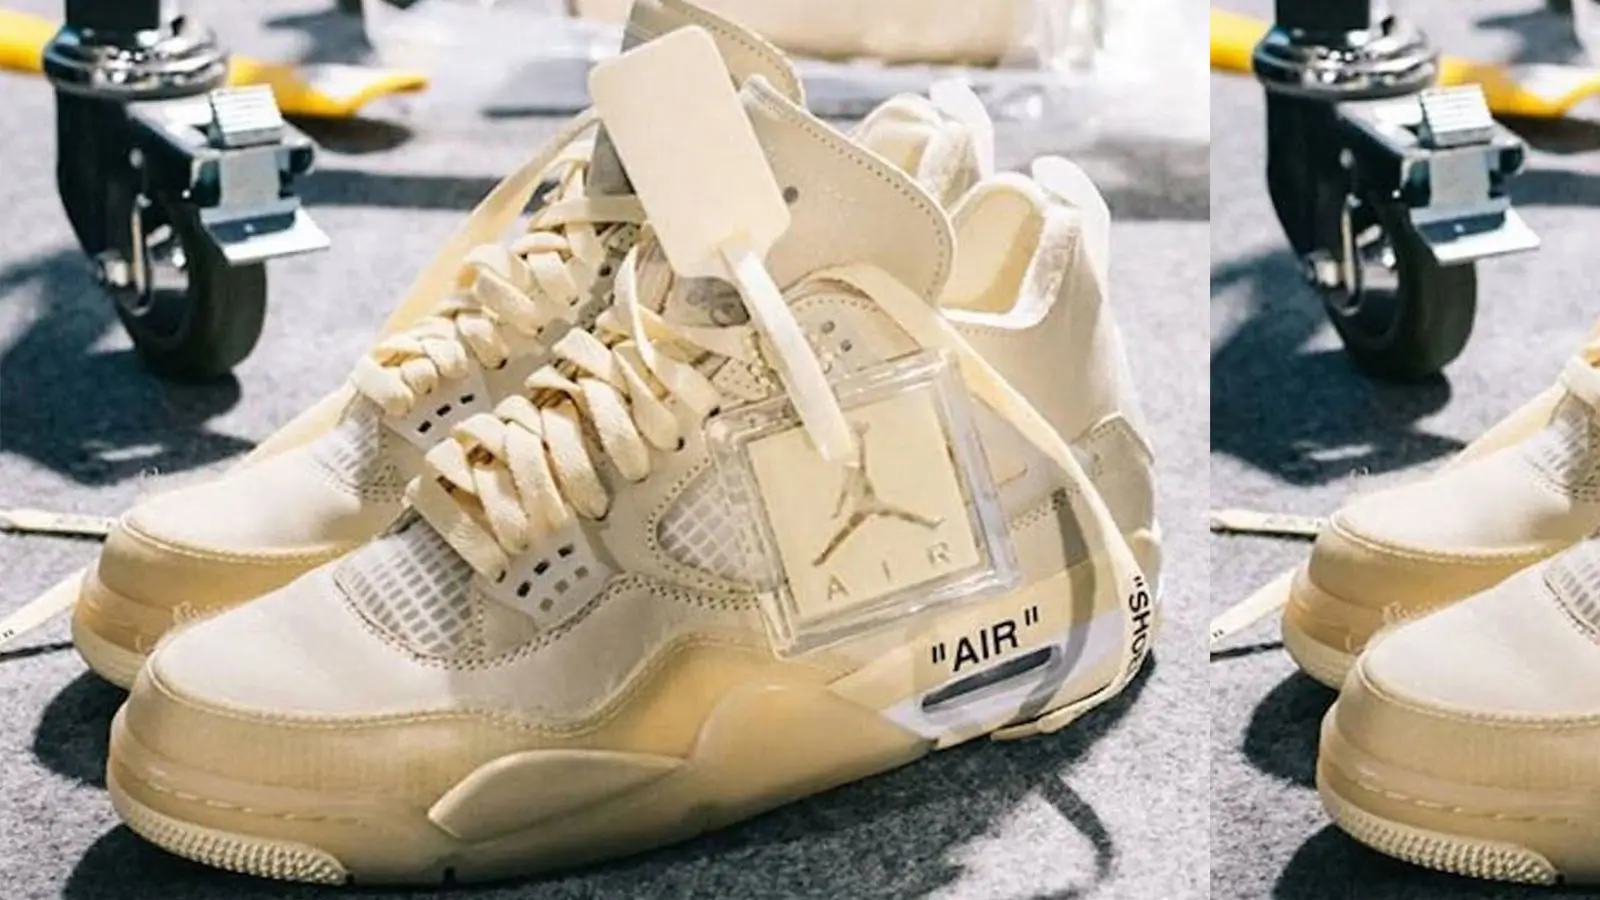 A Release Date’s Been Revealed For The Off-White x Air Jordan 4 ‘Sail ...